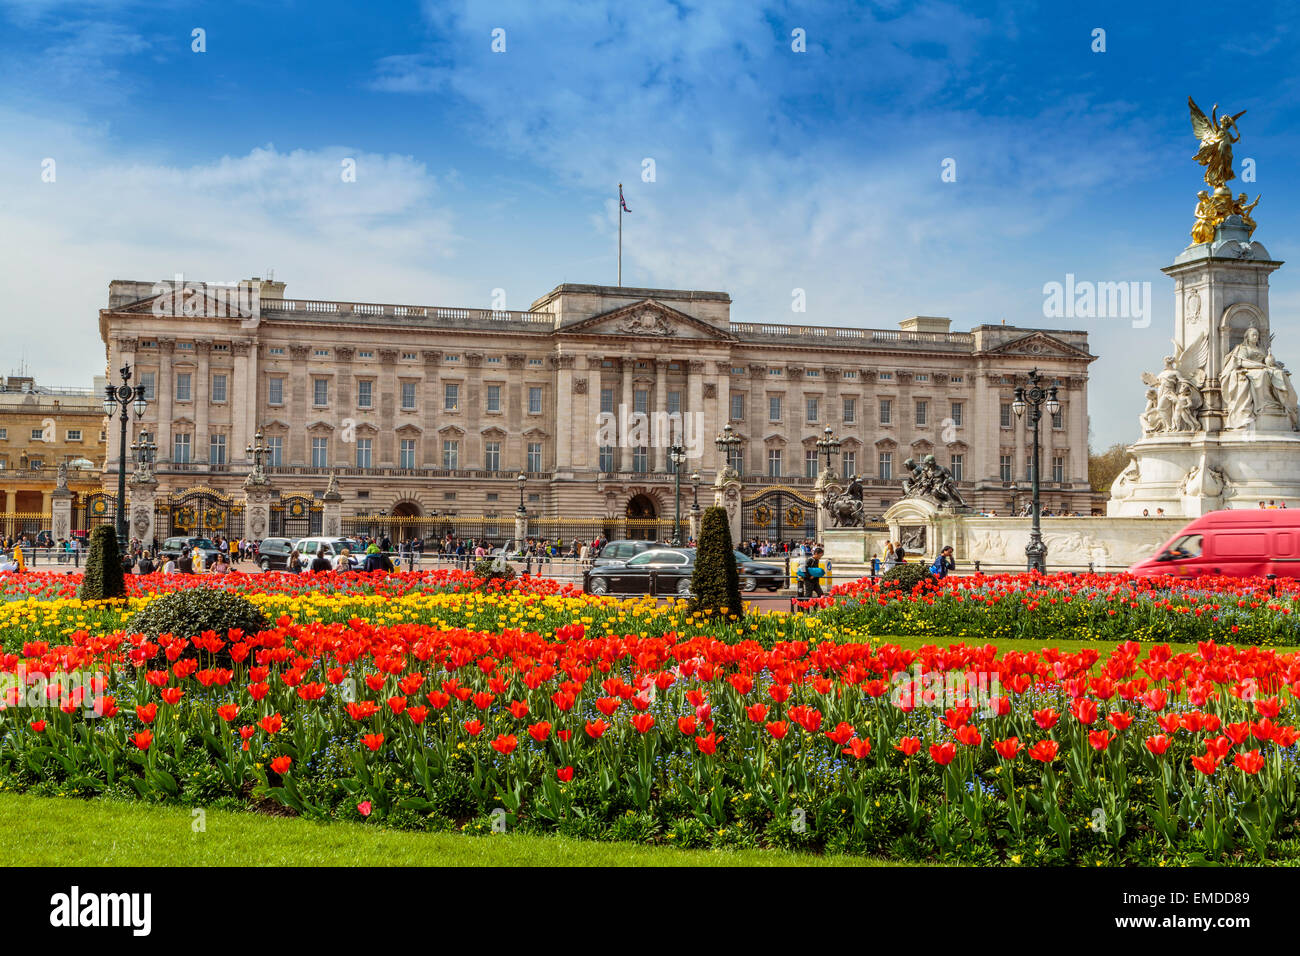 A Landscape view of Buckingham Palace in the Spring time City of Westminster London UK Stock Photo